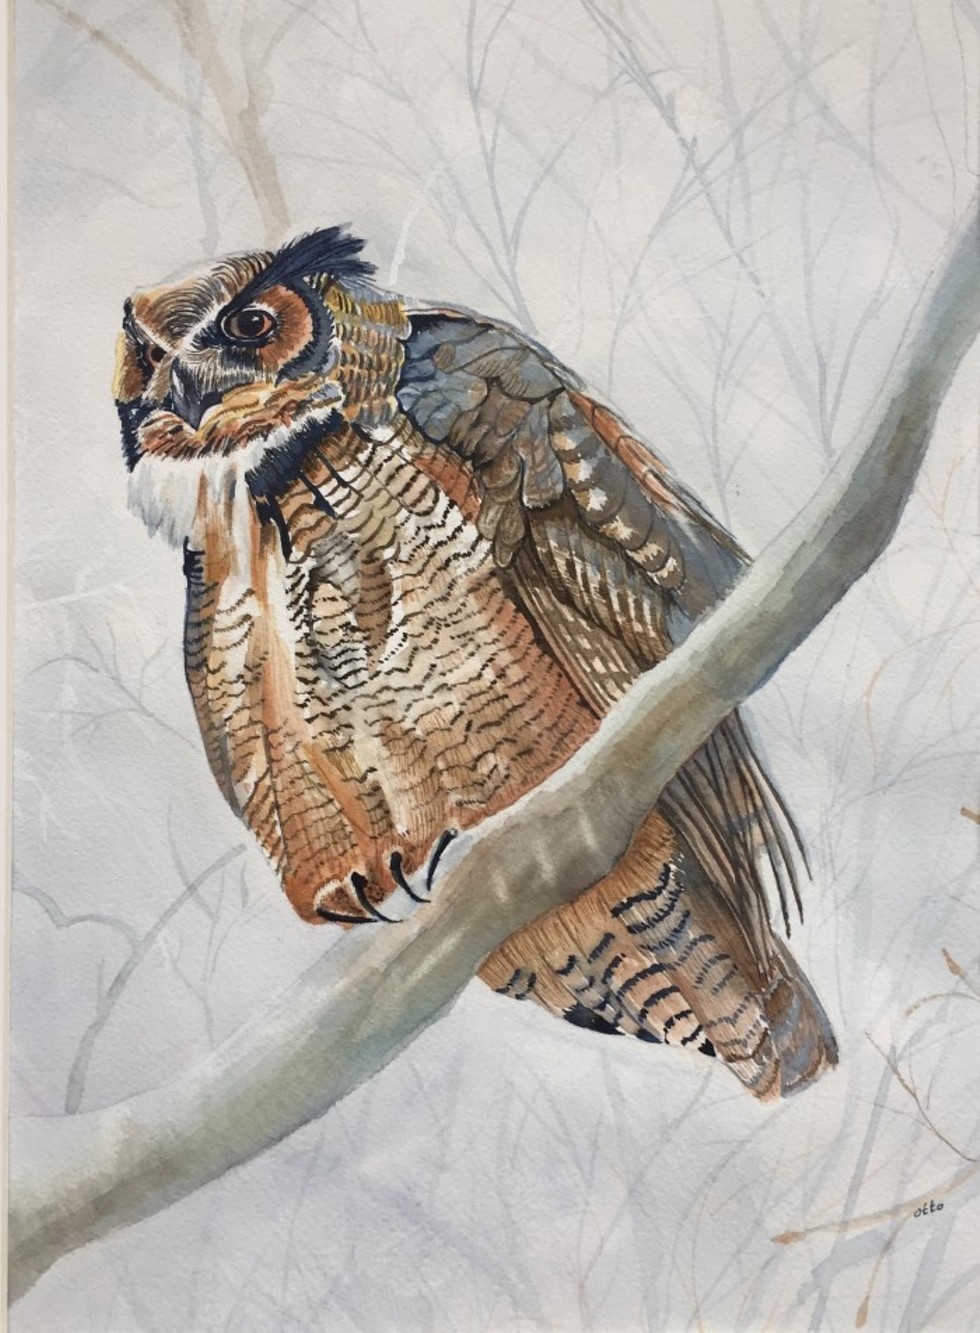 Otto Miranda's watercolor paintings will be shown in July and August at the Hudson Area Library